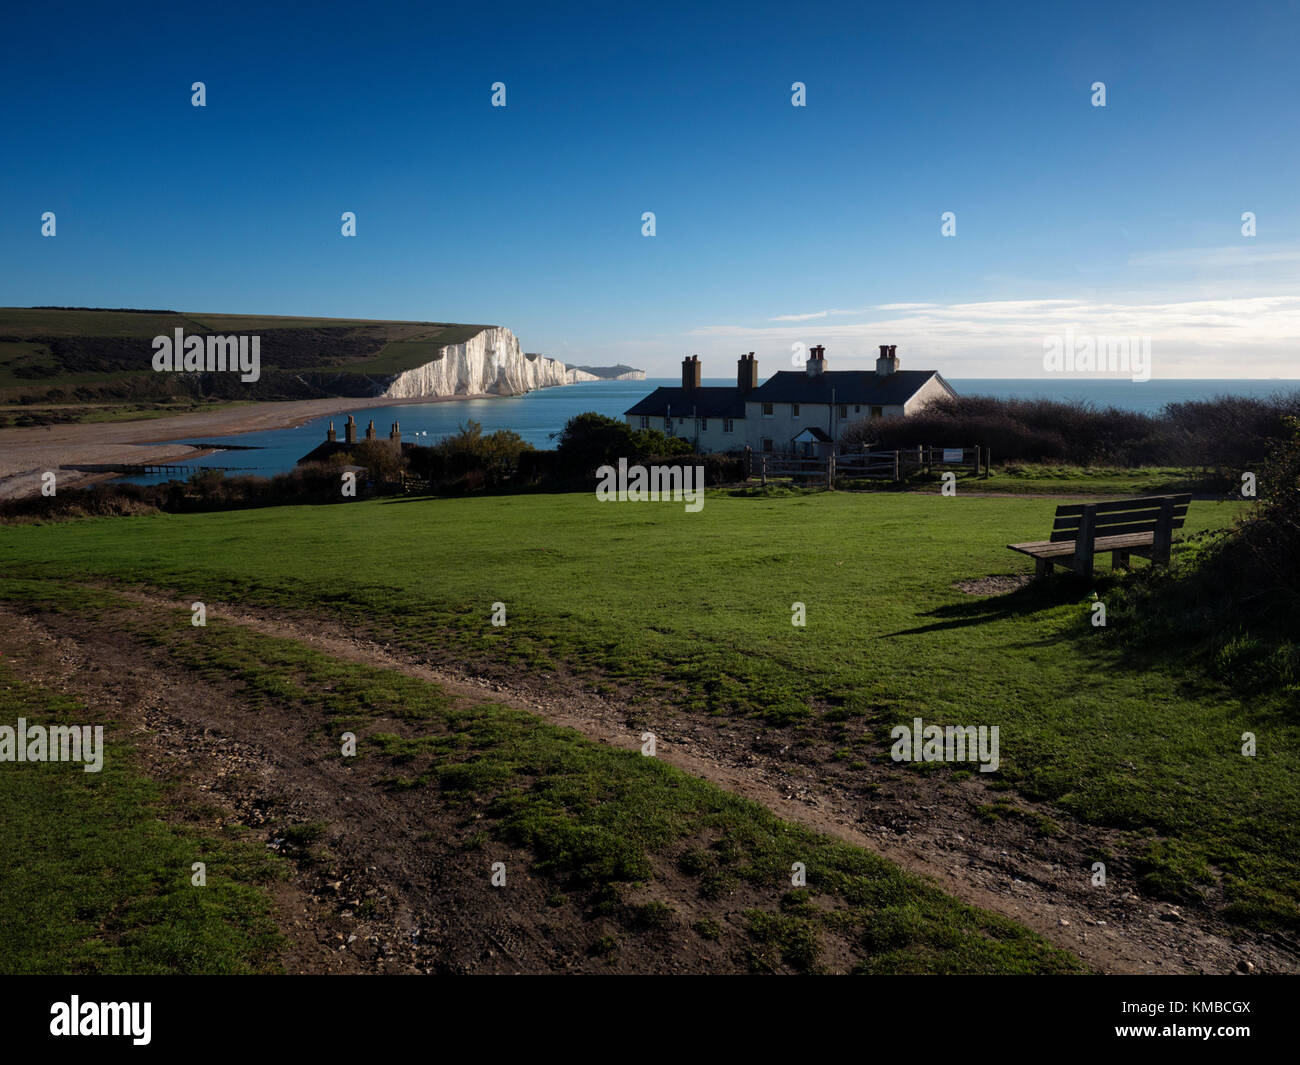 Coast Guard cottages in front of the Seven Sisters chalk cliffs at Cuckmere Haven, East Sussex, England Stock Photo